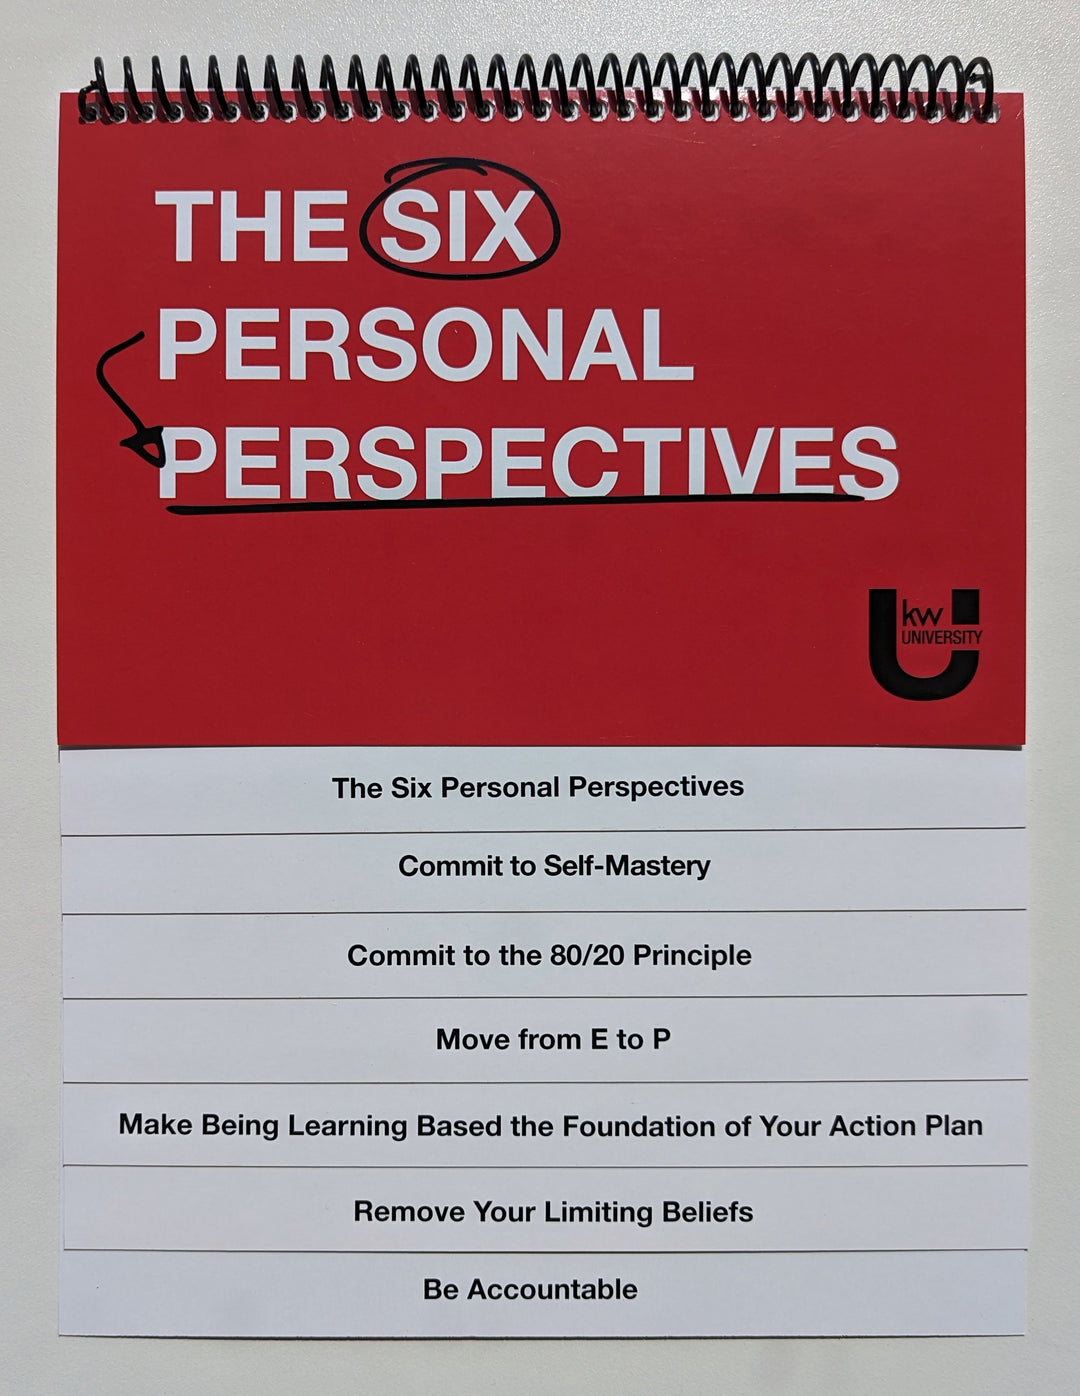 KWU Quick Flip Book - The 6 Personal Perspectives